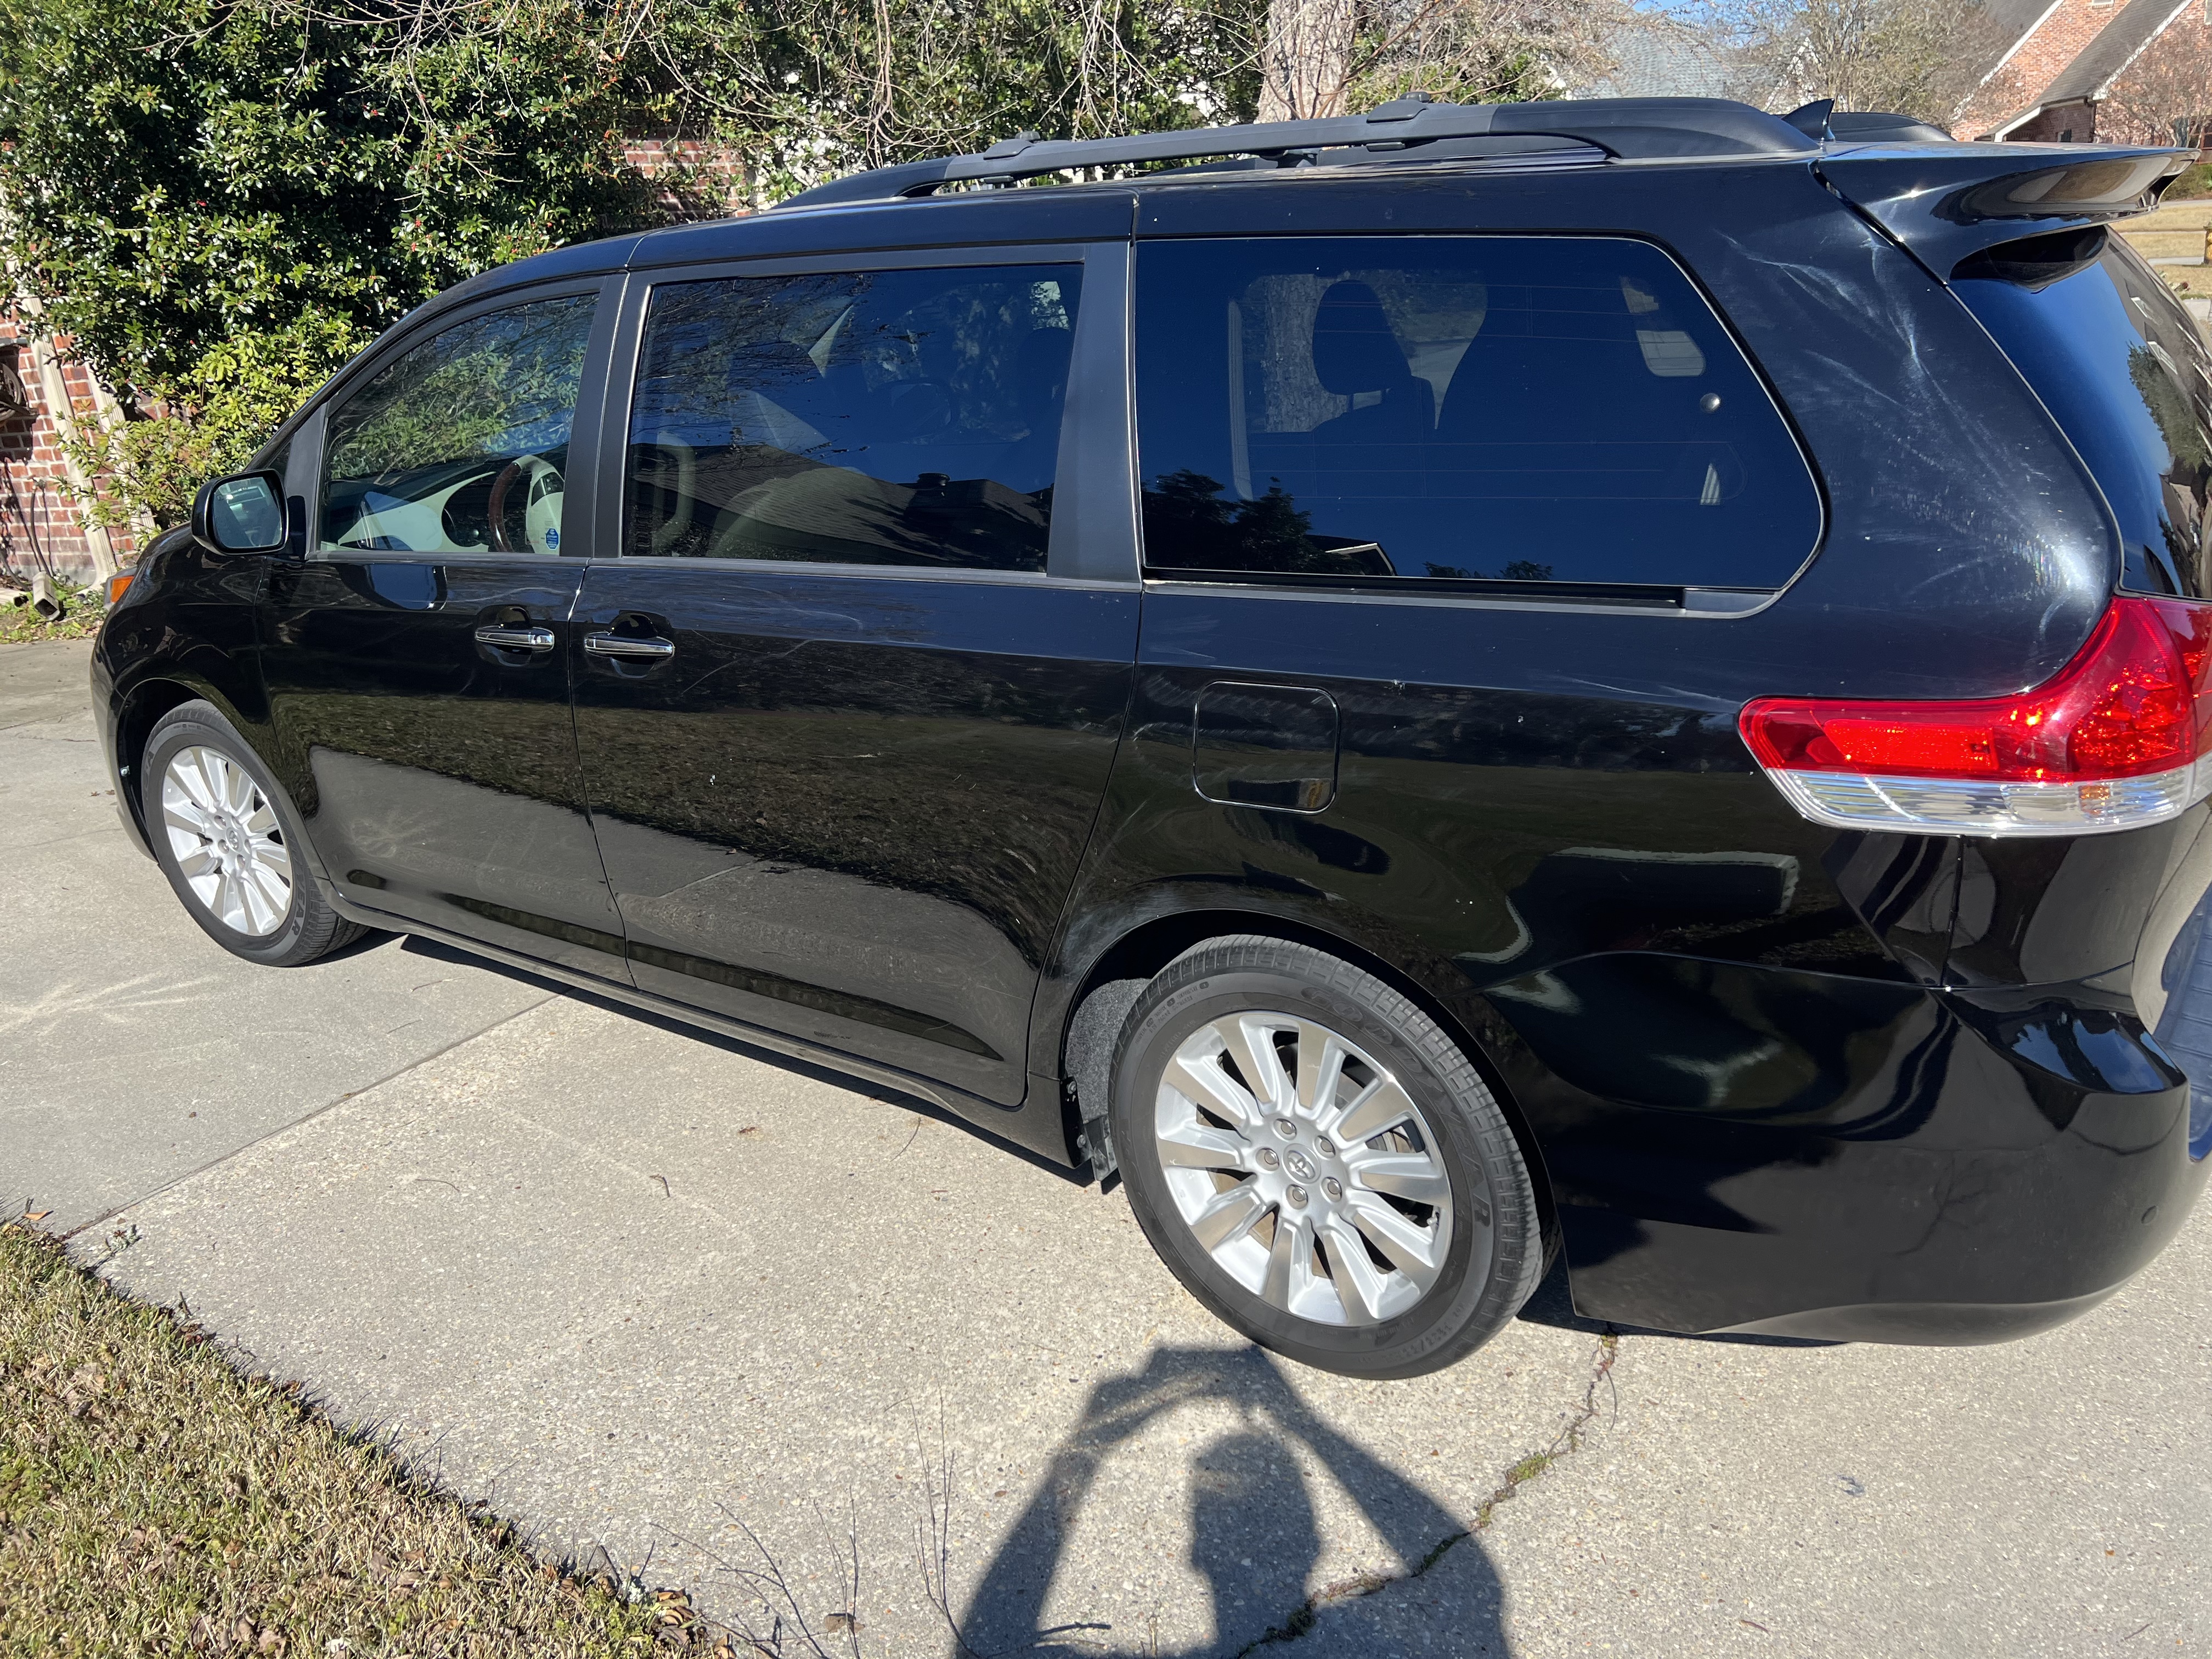 Used 2012 Toyota Sienna for Sale - Kelley Blue Book